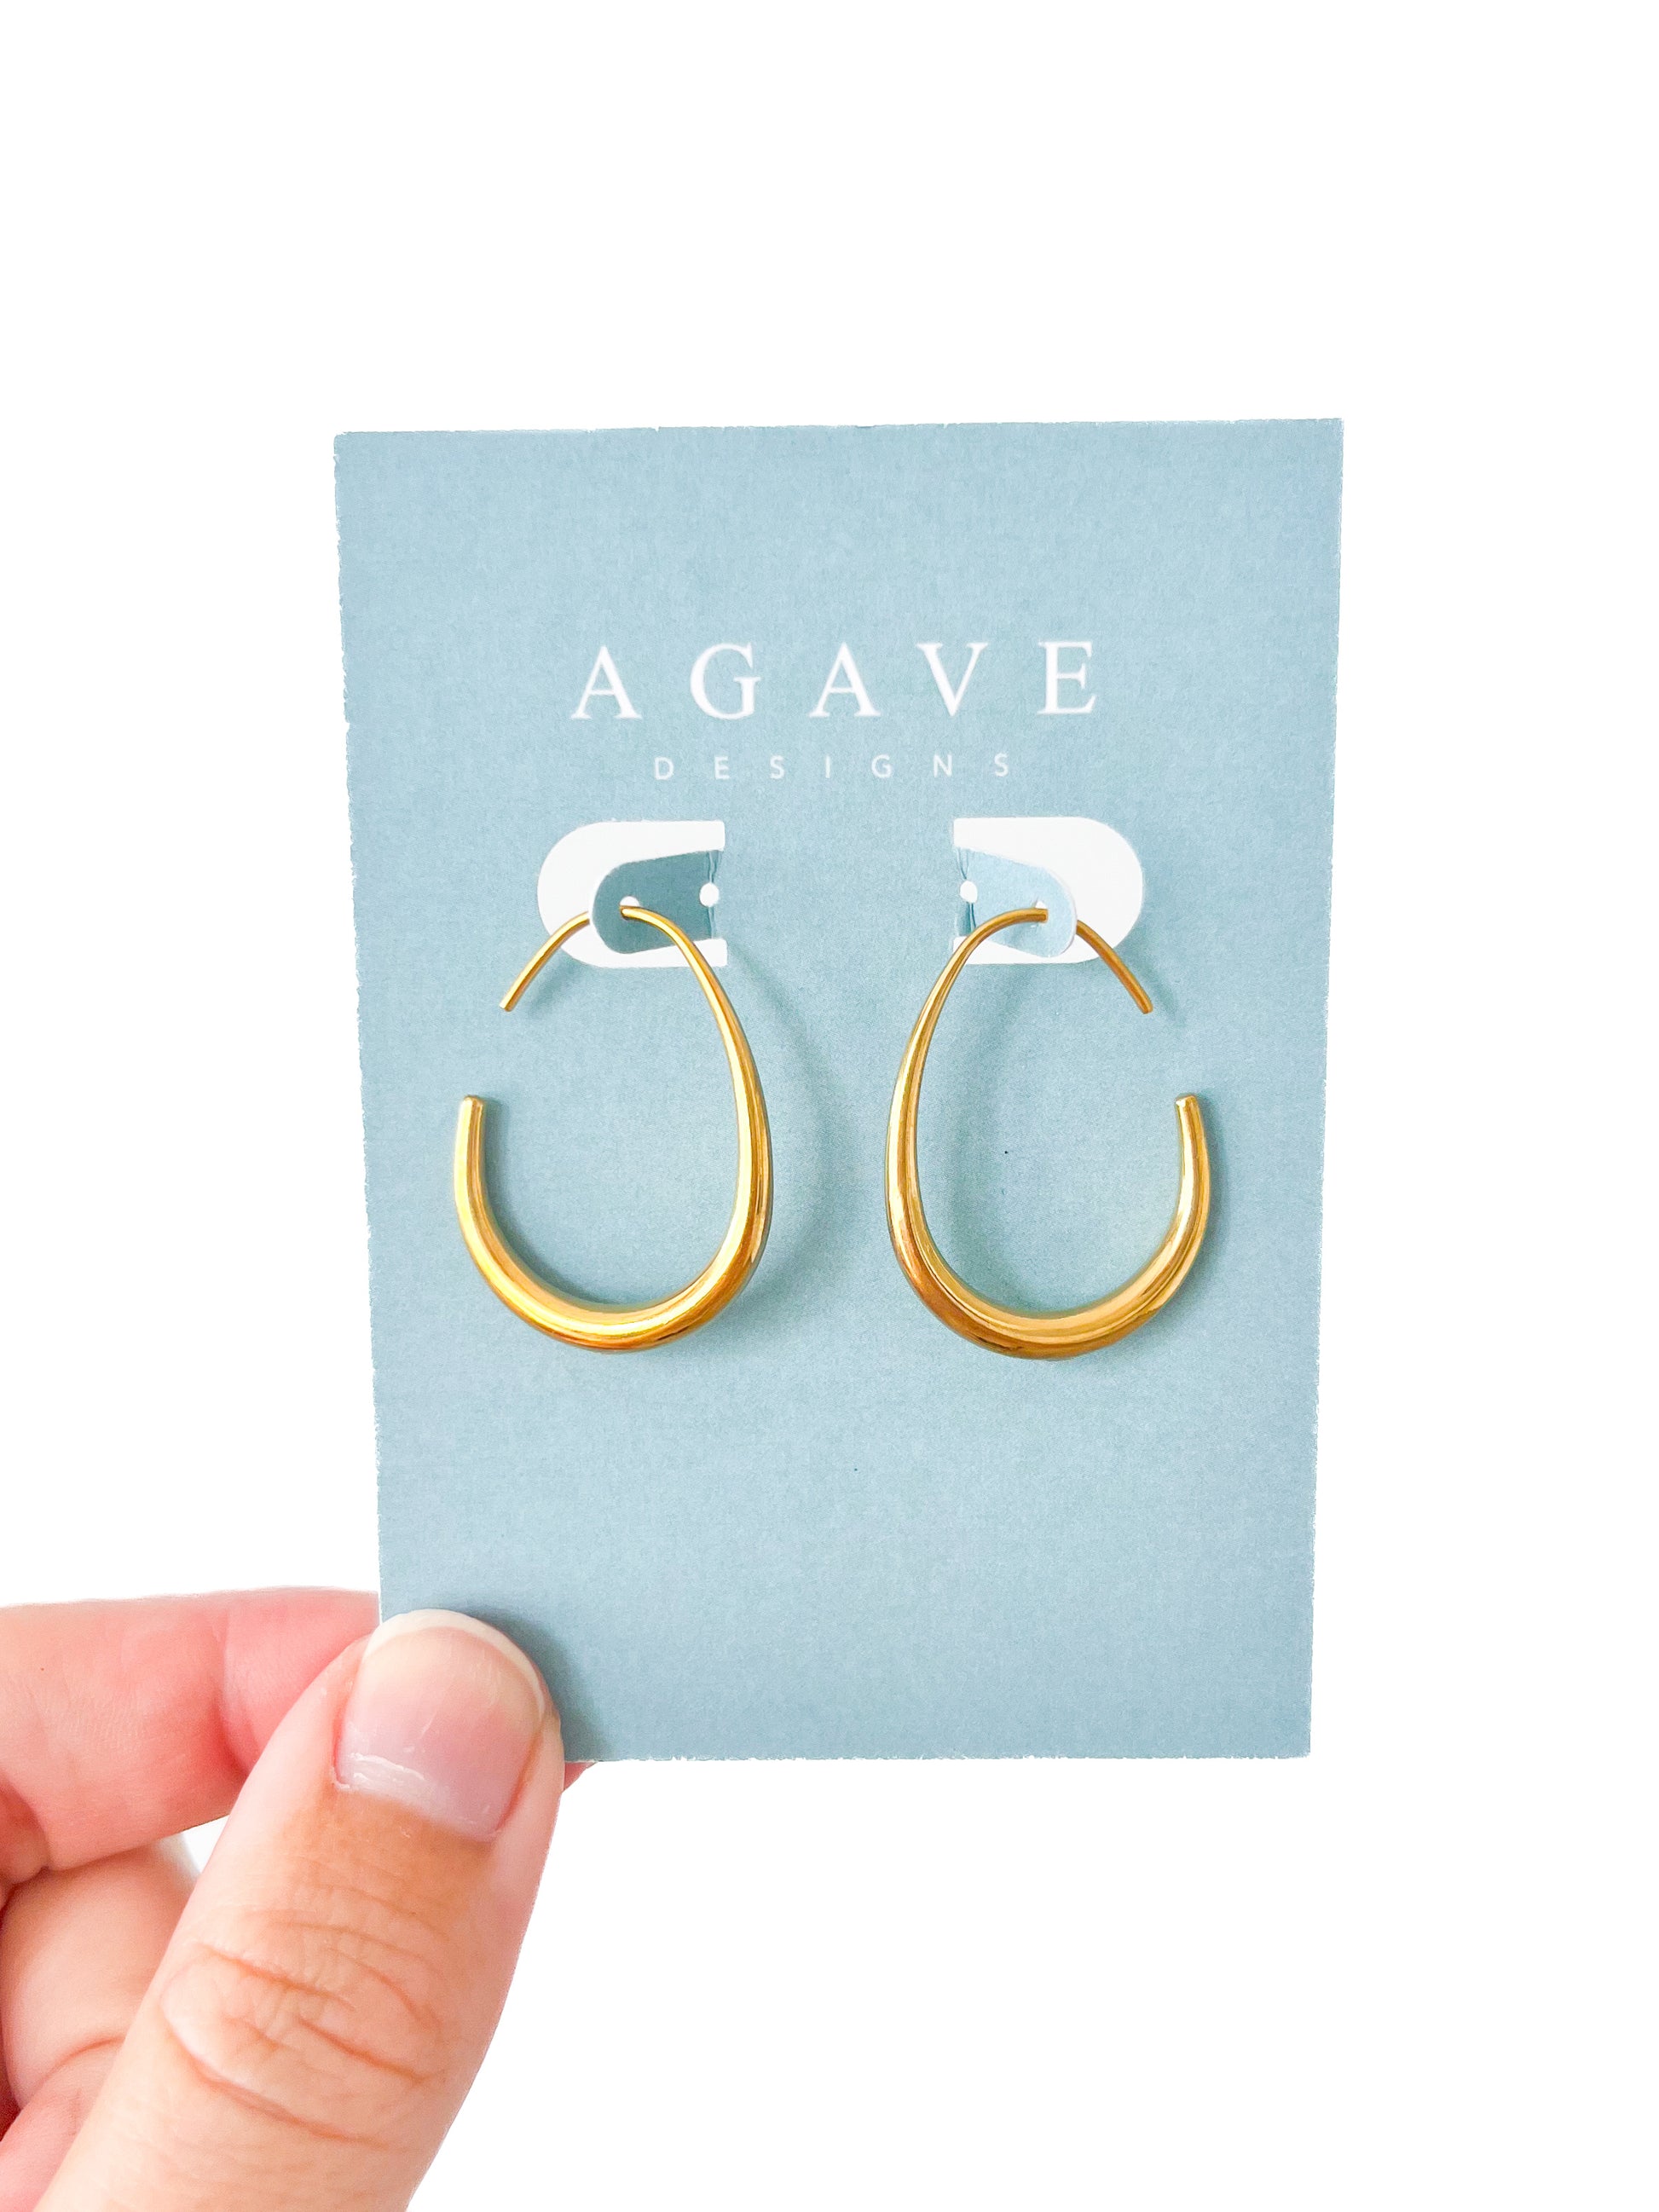 A hand holds a card with "AGAVE DESIGNS" printed on it. The card features "Oval Drops - Small," a pair of gold semi-open hoop earrings measuring 30mm x 22mm, against a light blue background. The earrings boast a sleek and minimalist design, crafted from stainless steel.